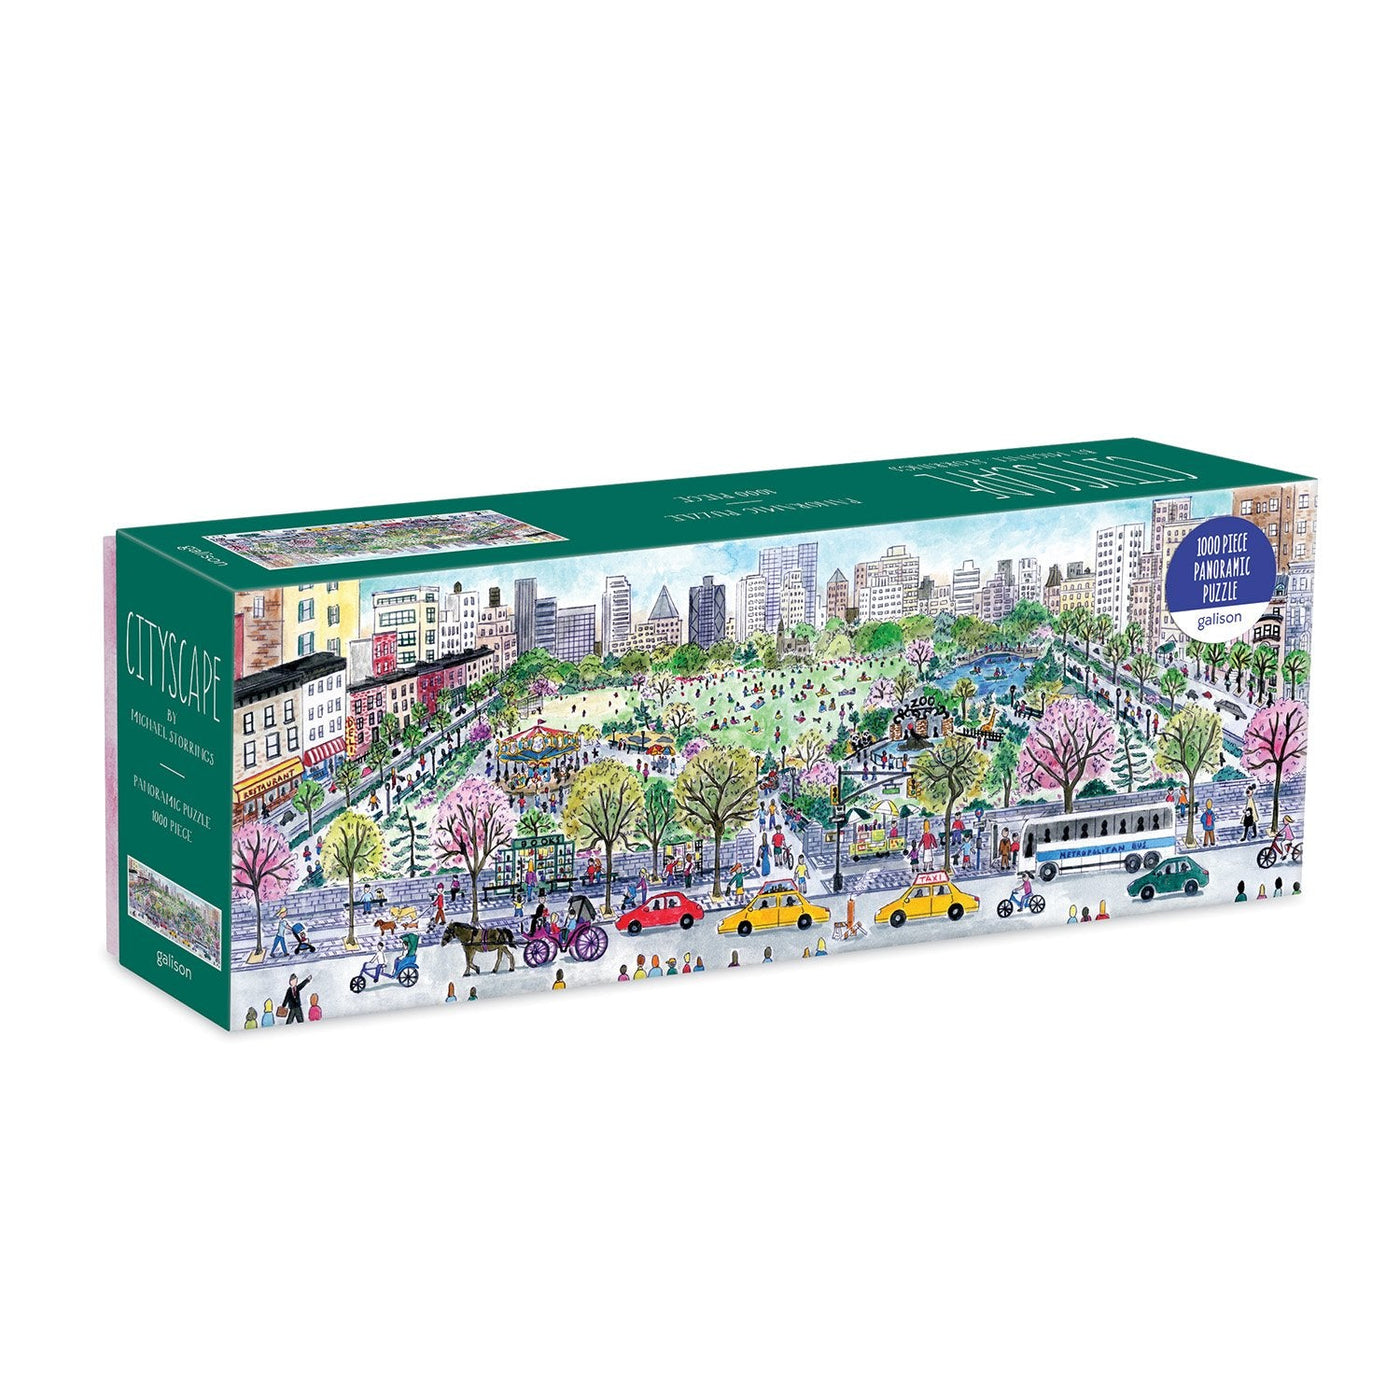 Michael Storrings Cityscape | 1,000 Piece Panoramic Jigsaw Puzzle